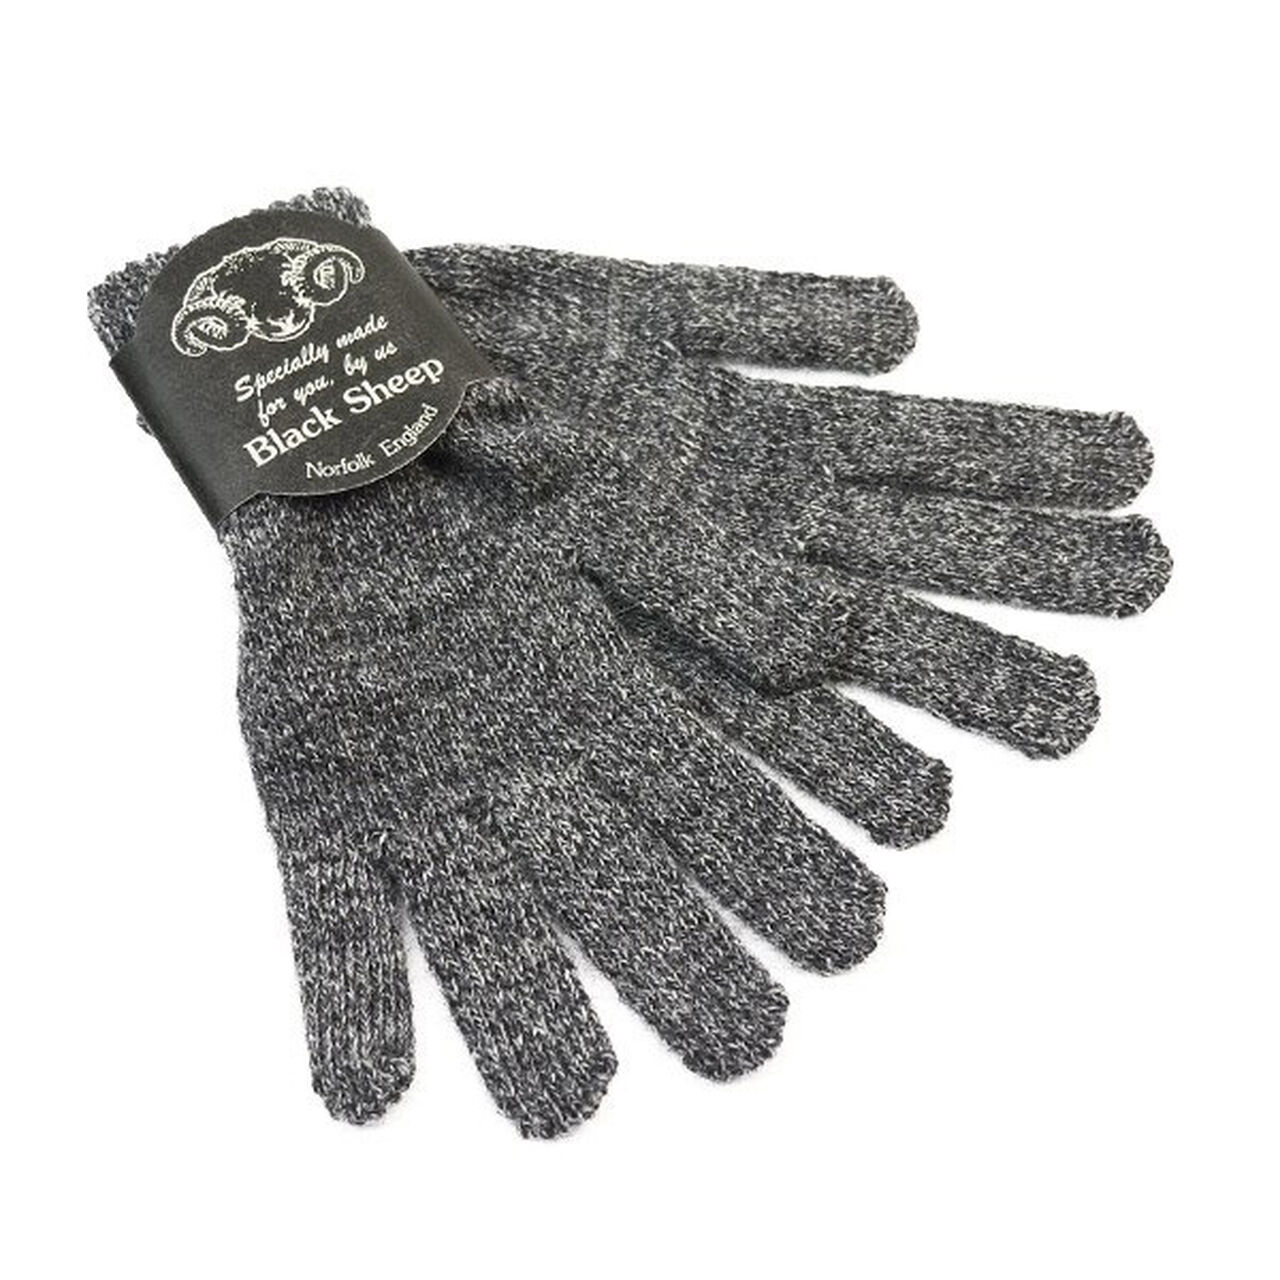 GL07 knitted glove,GreyTwist, large image number 0